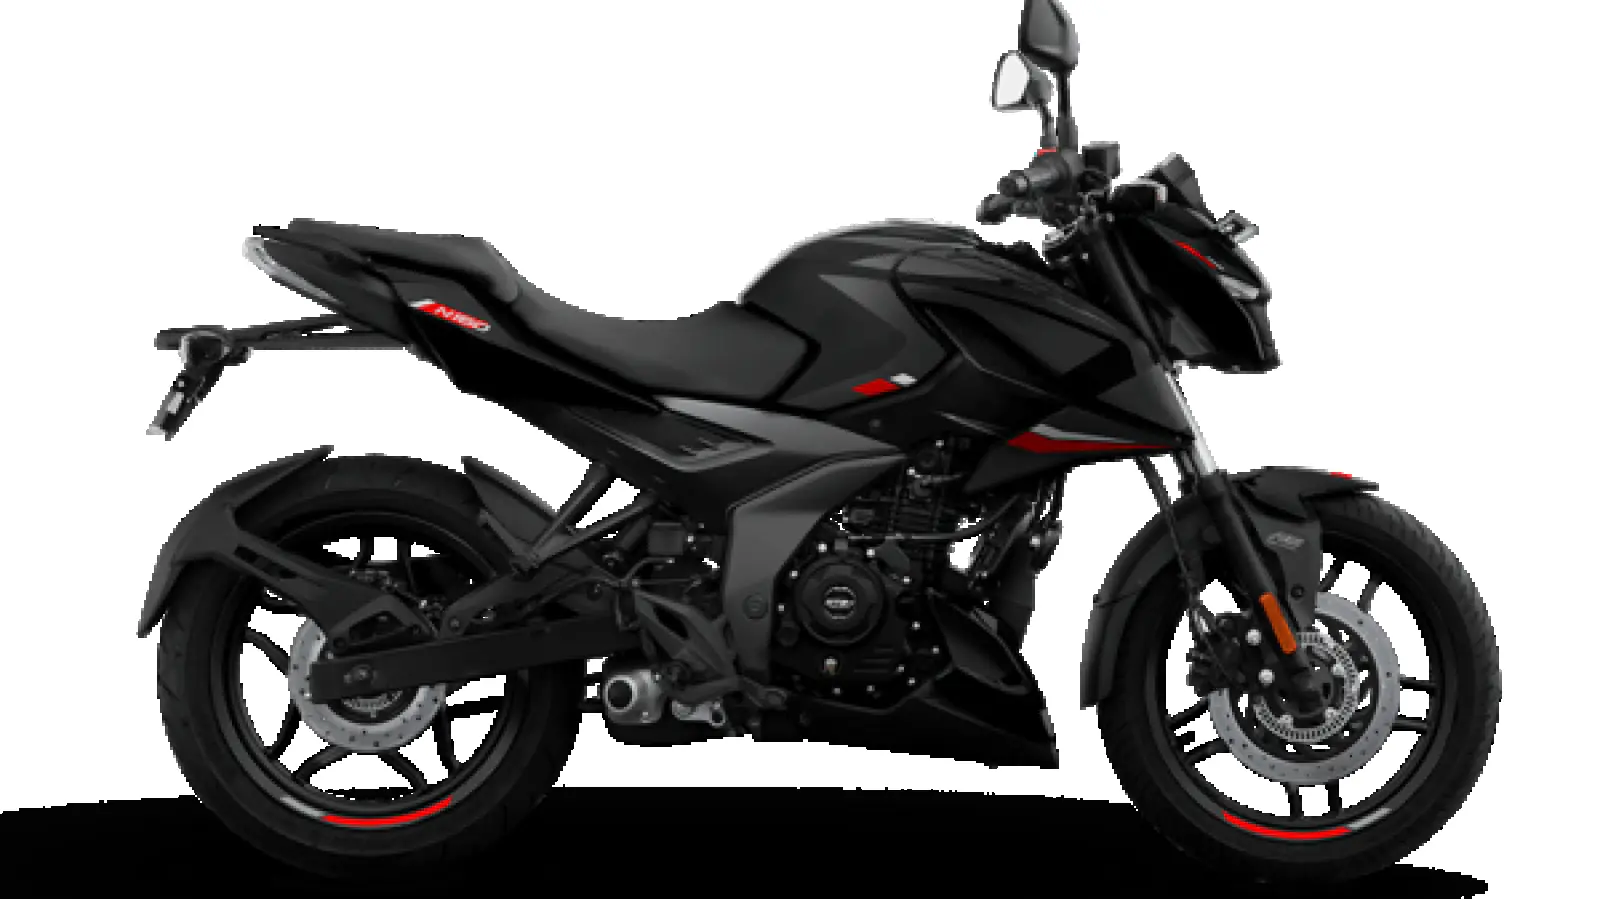 Single-channel ABS variant of Bajaj Pulsar N160 discontinued, know the reason behind it